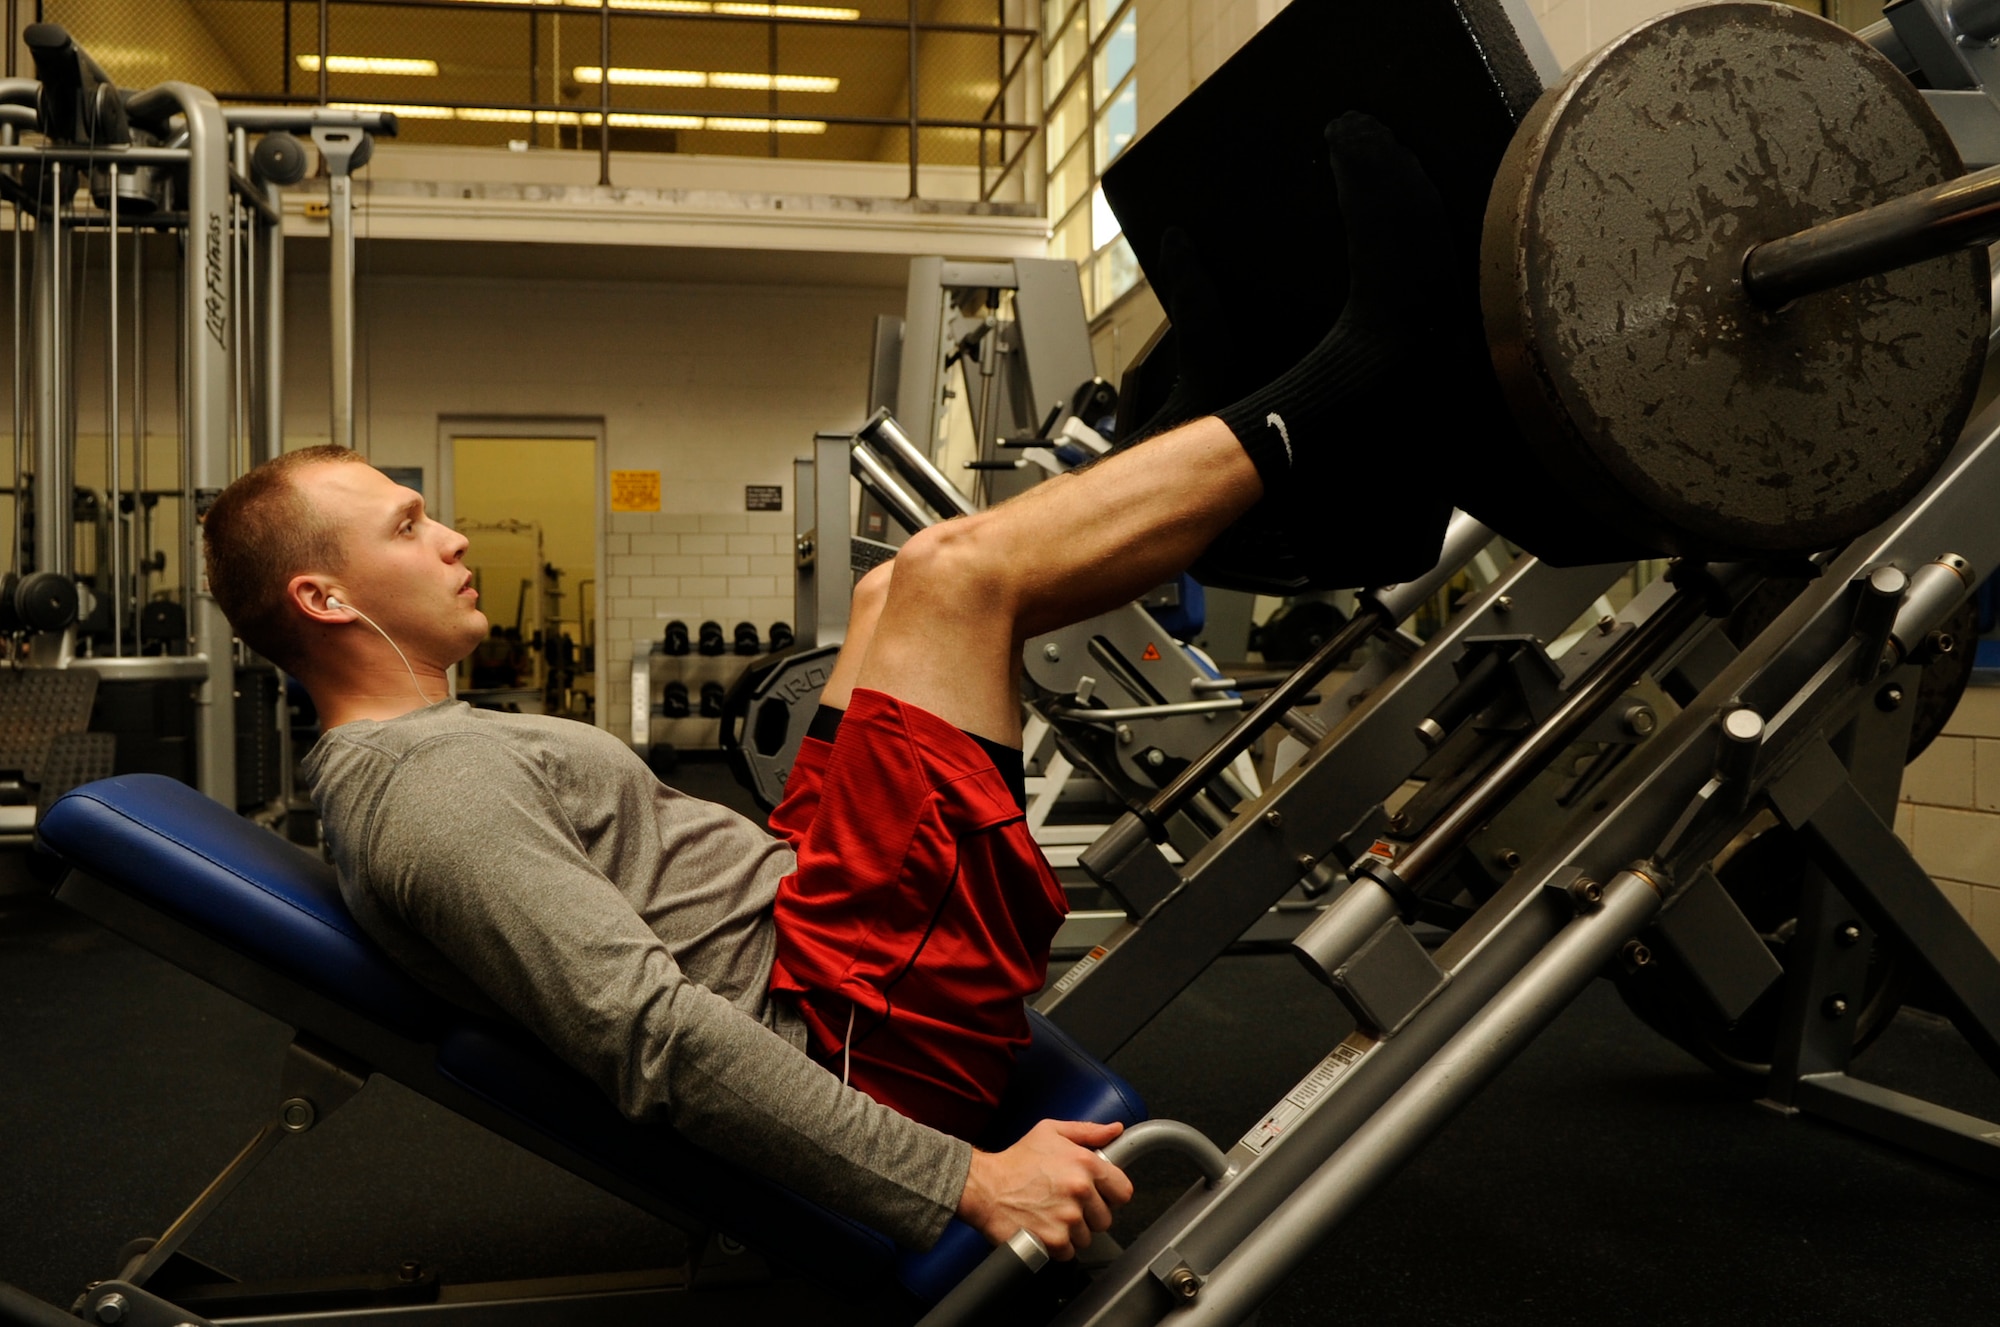 Senior Airman Tyler Cerney, 544th Intelligence, Surveillance and Reconnaissance Group, detachment 1, intelligence analyst, performs a leg press exercise, June 29, 2015, Vandenberg Air Force Base, Calif. For Cerney, the benefits of staying in peak physical condition, especially while in the military, are abundant. (U.S. Air Force photo by Senior Airman Shane Phipps/Released)